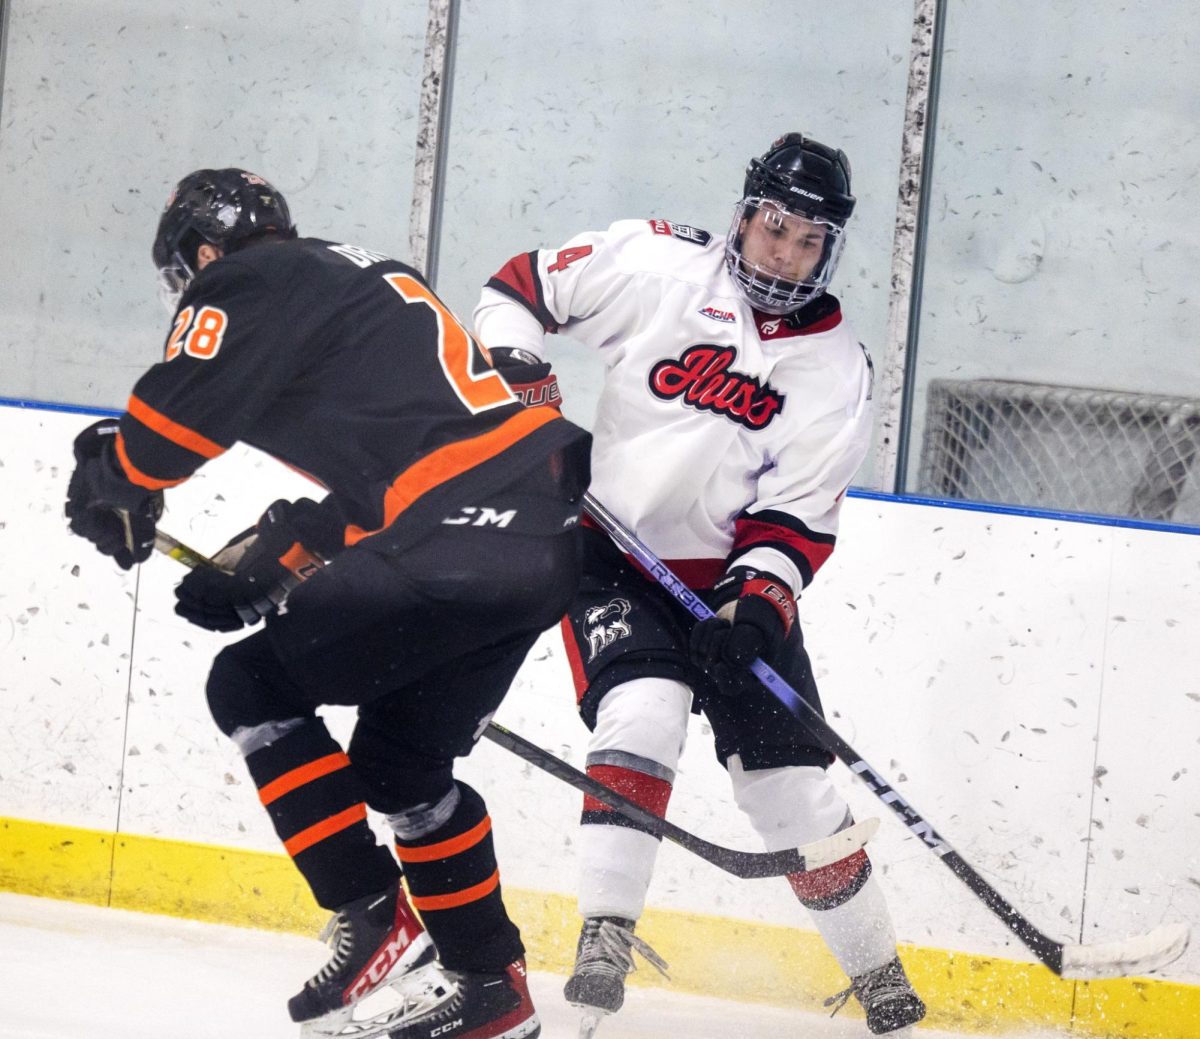 Junior defenseman Keaton Peters battles for the puck in NIU Hockeys game against the University of Jamestown on Oct. 13. The Huskies fell to the Midland University Warriors on Friday by a final score of 5-3. (Courtesy of NIU Hockey)